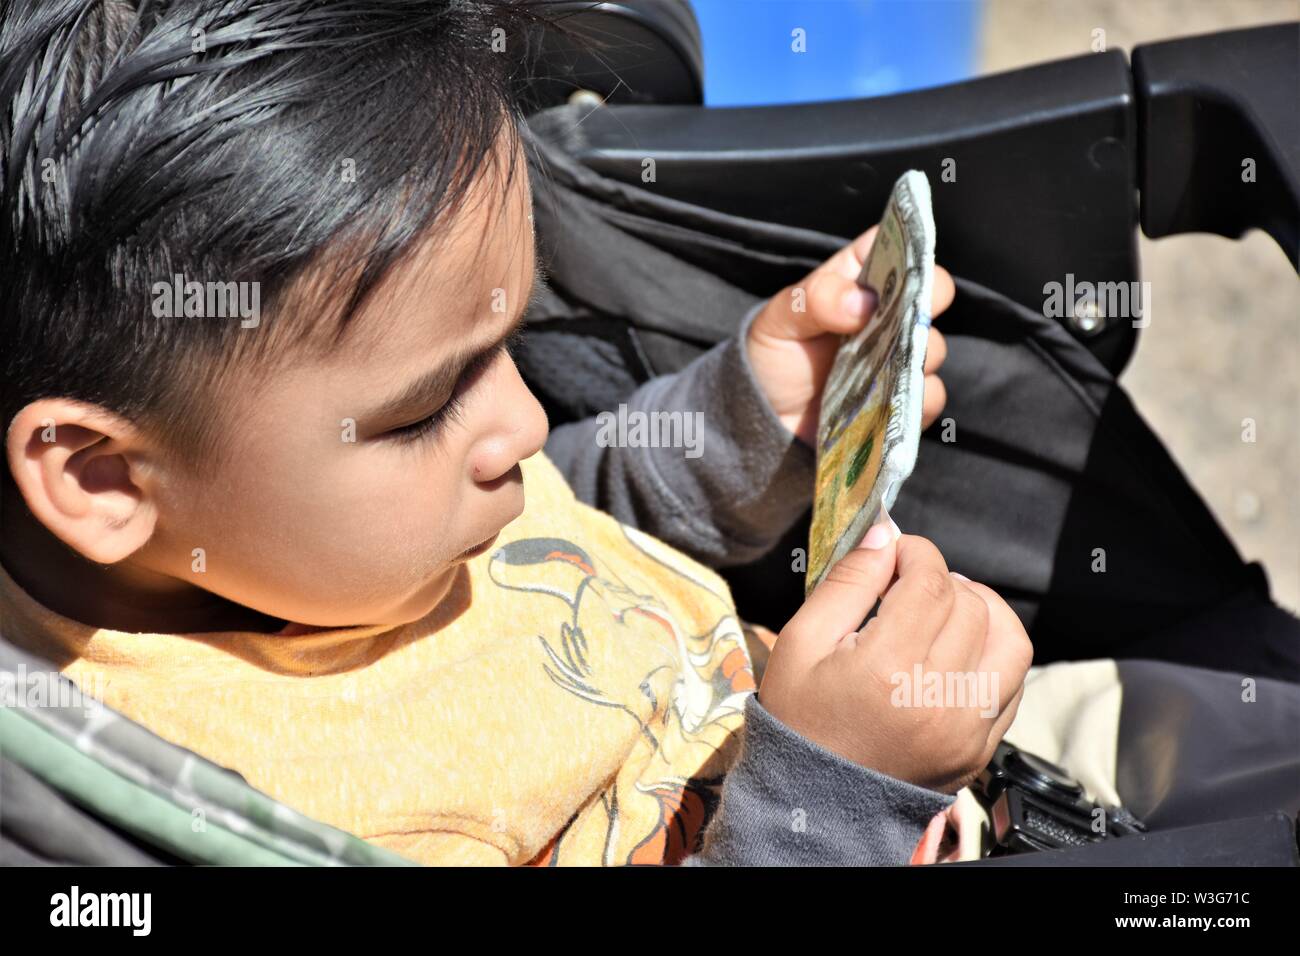 3 or 4 year old child playing with fake paper money hundred dollar bills in stroller frowning and watching real people at fair Stock Photo